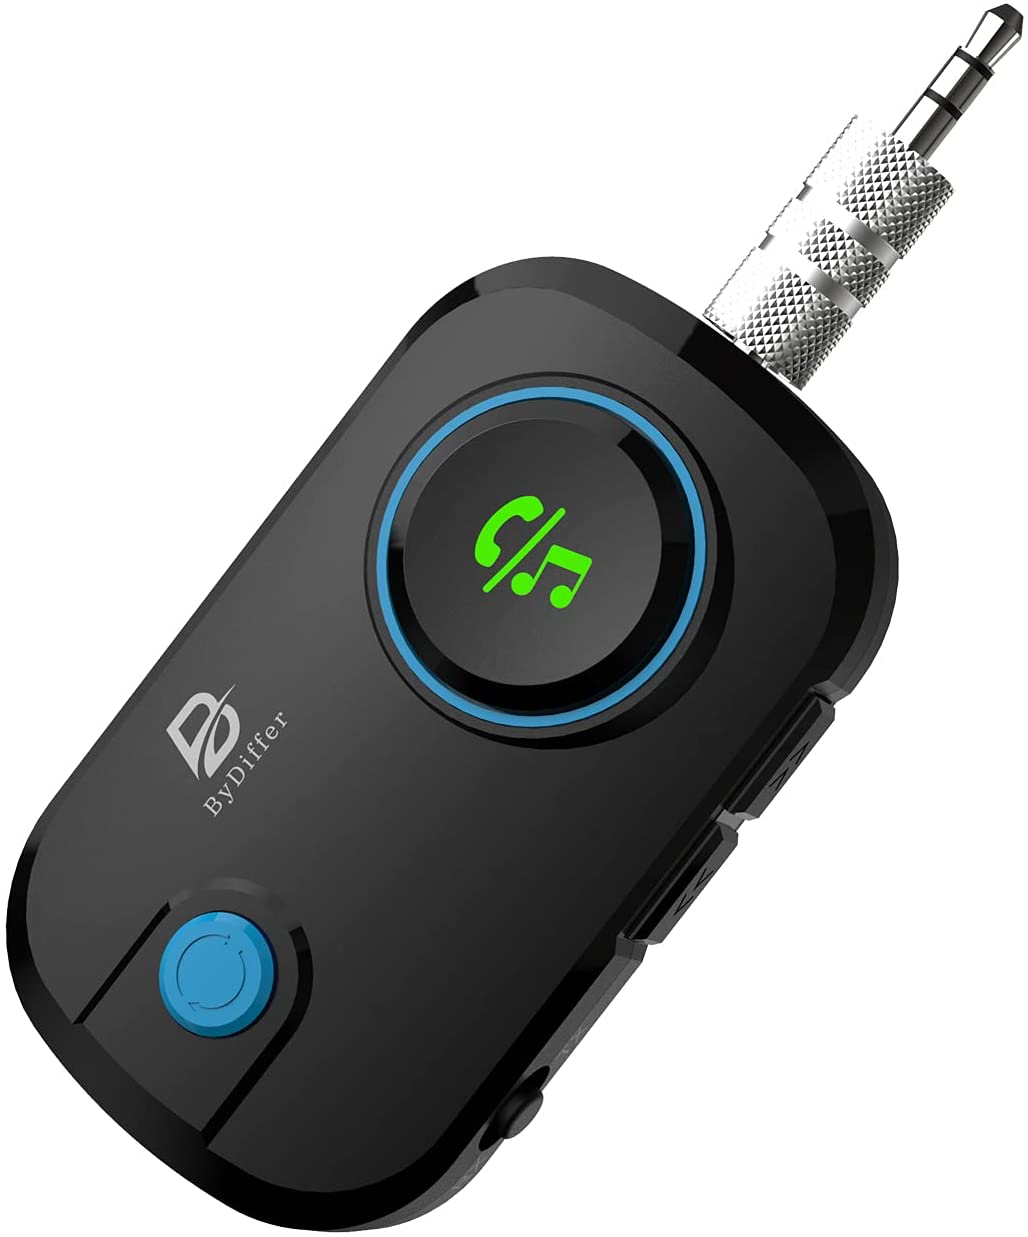 Bluetooth 5.0 Audio Transmitter for TV